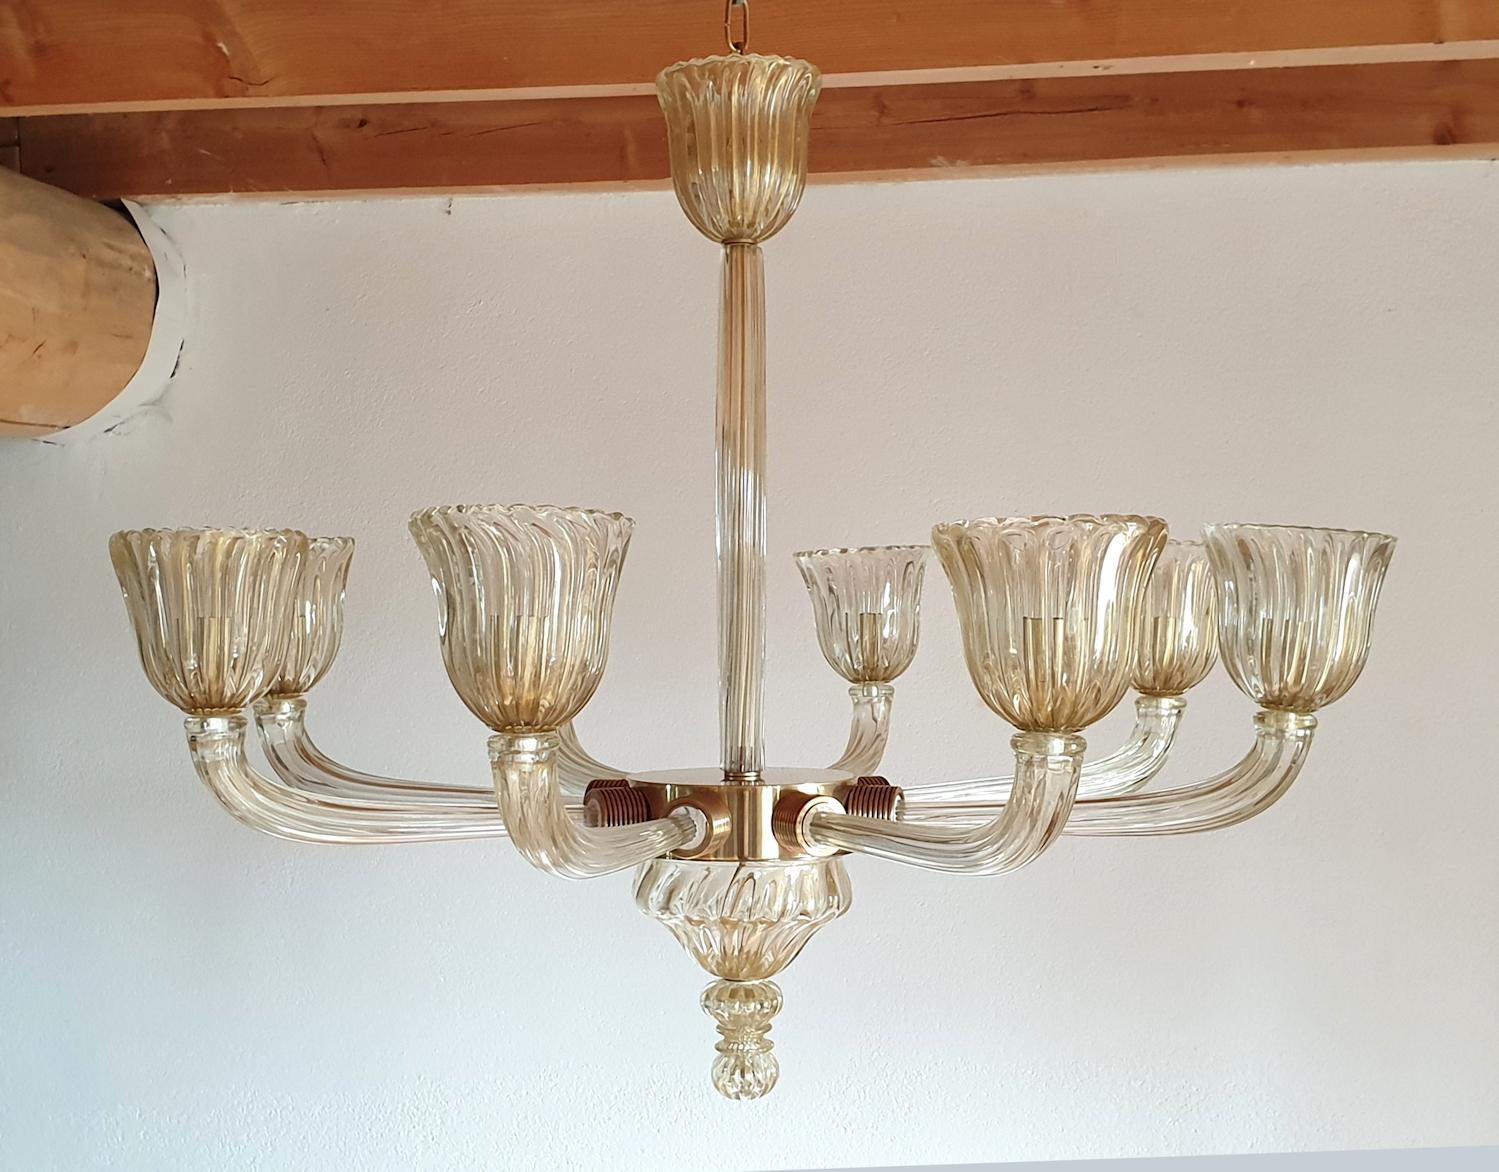 Large Mid-Century Modern 8 lights Murano glass chandelier, attributed to Venini, Italy, late 1970s.
Made of hand blown clear & gold glass, with a beautiful quality, and brass mounts.
Rewired for the US.
The brass has been repolished.
Its pure